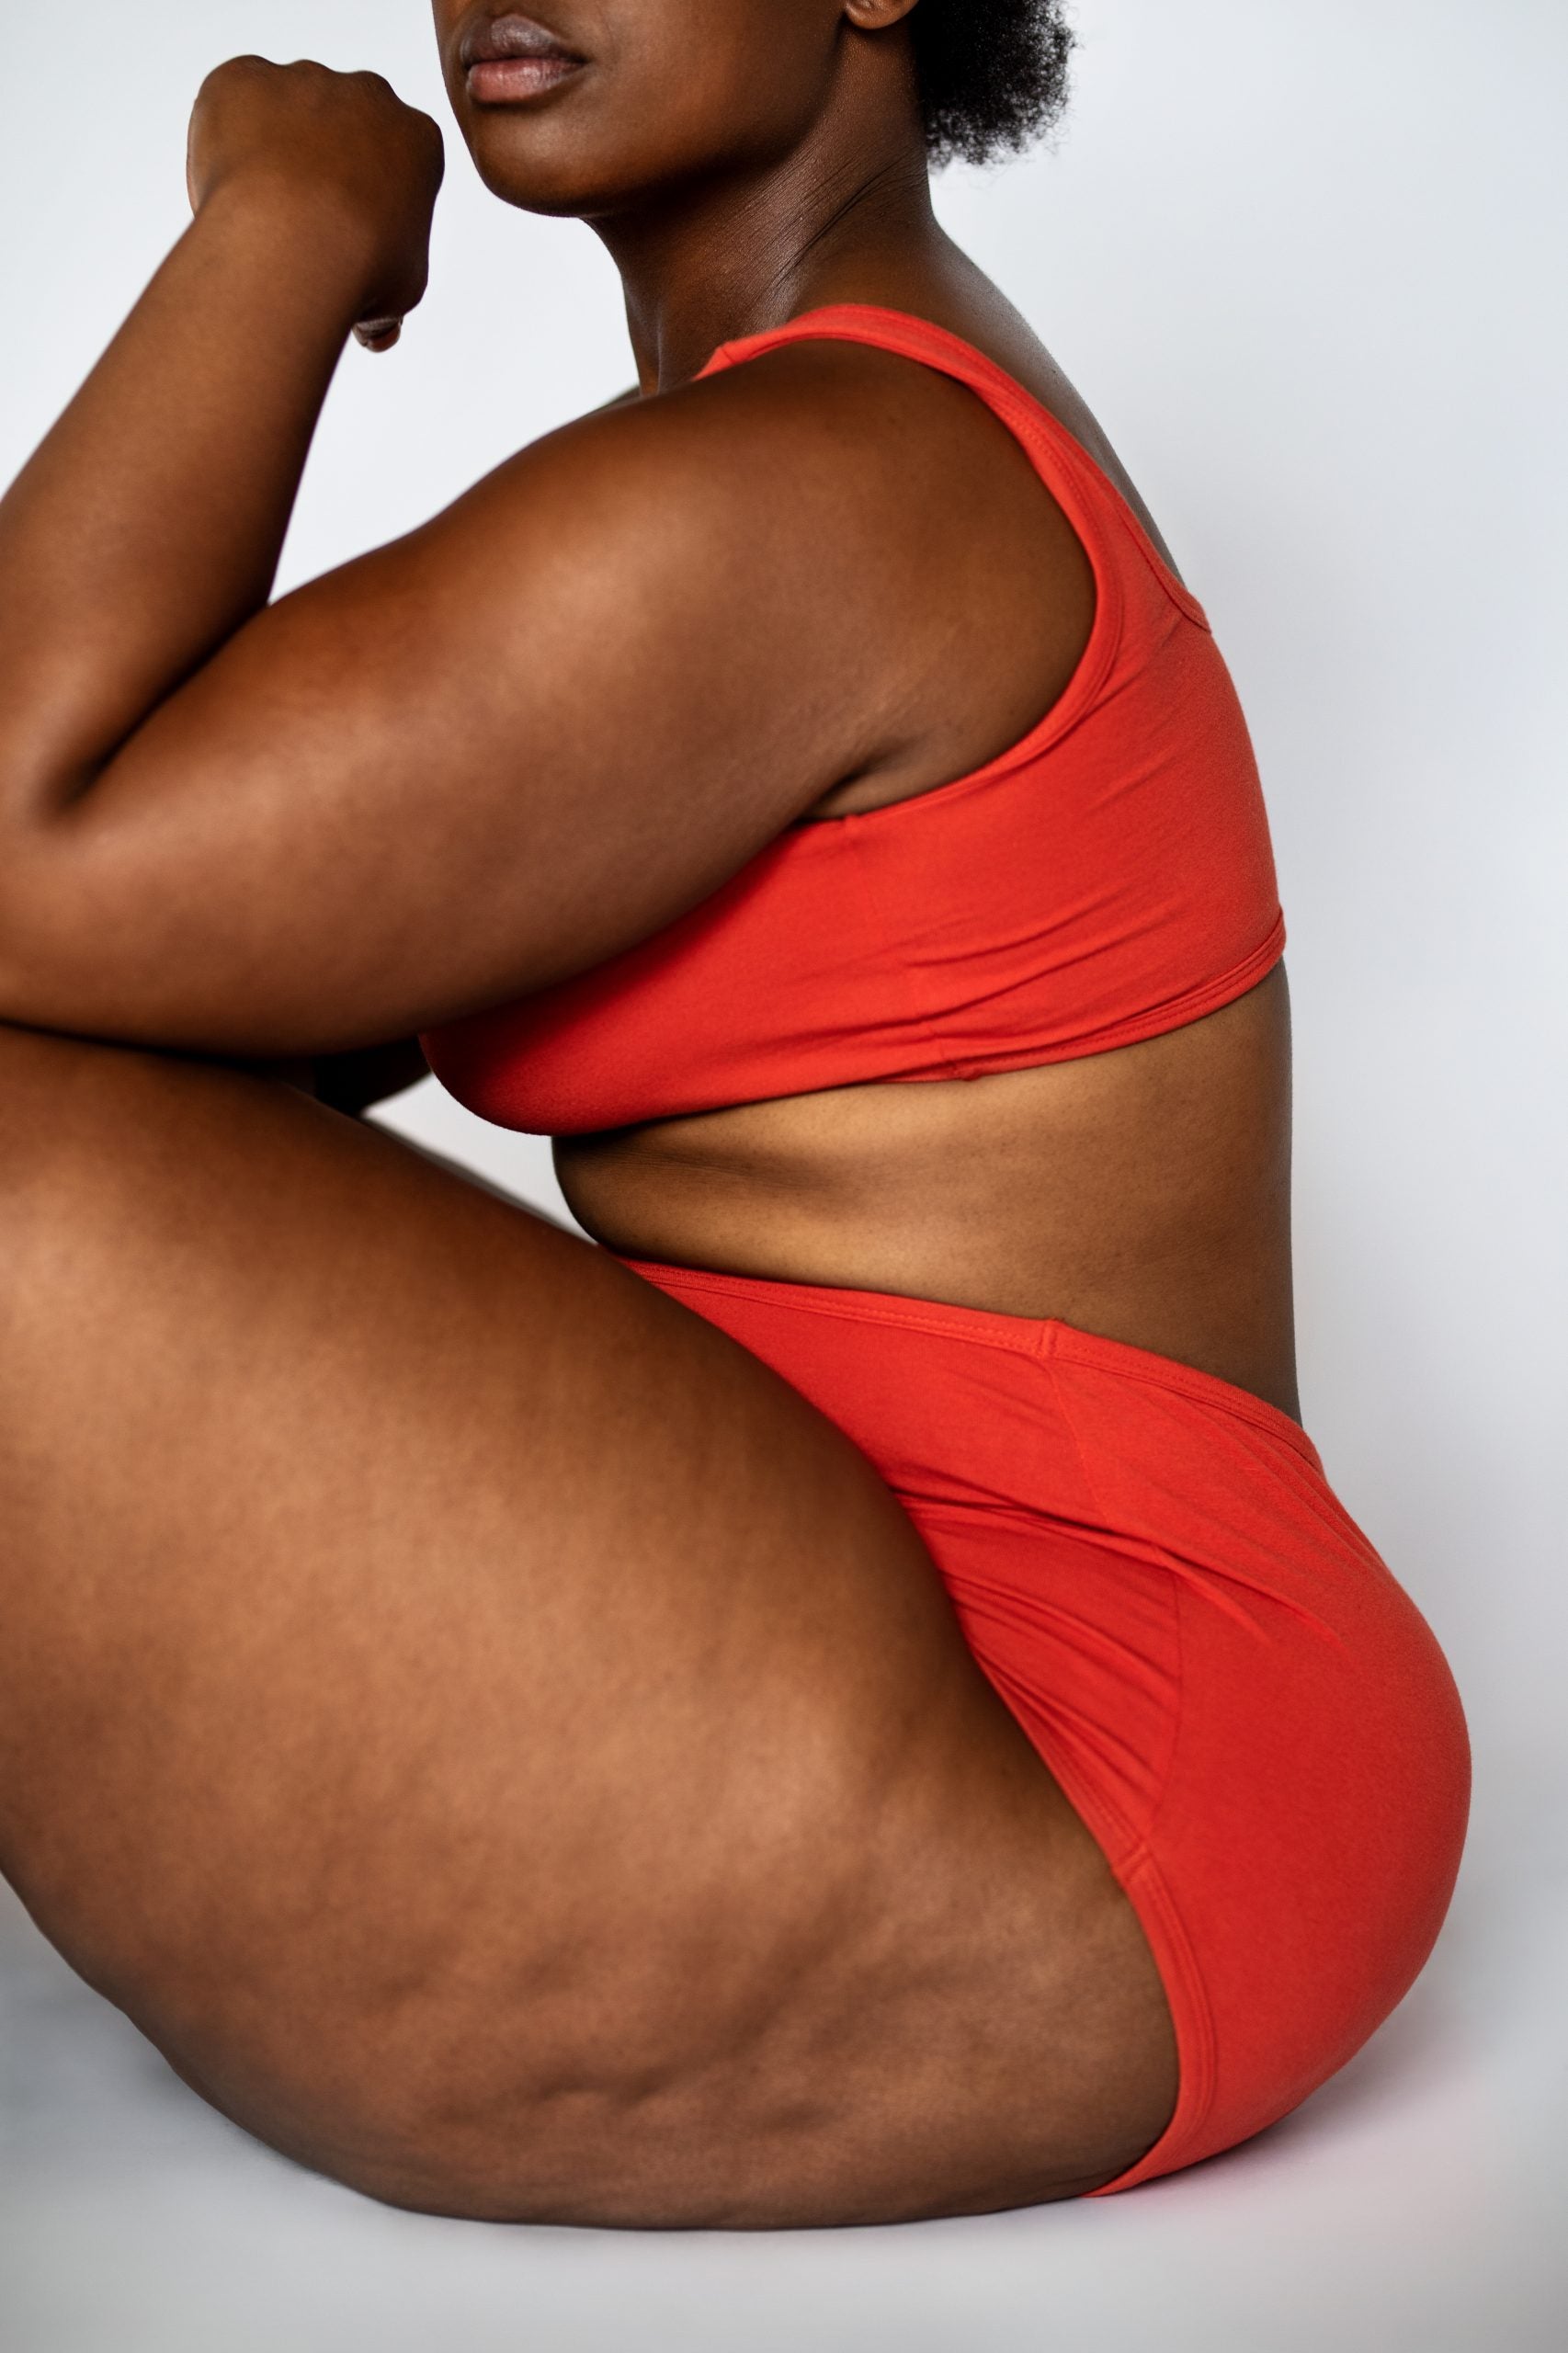 Dermatologist Michelle F. Henry Busts Myths About Cellulite